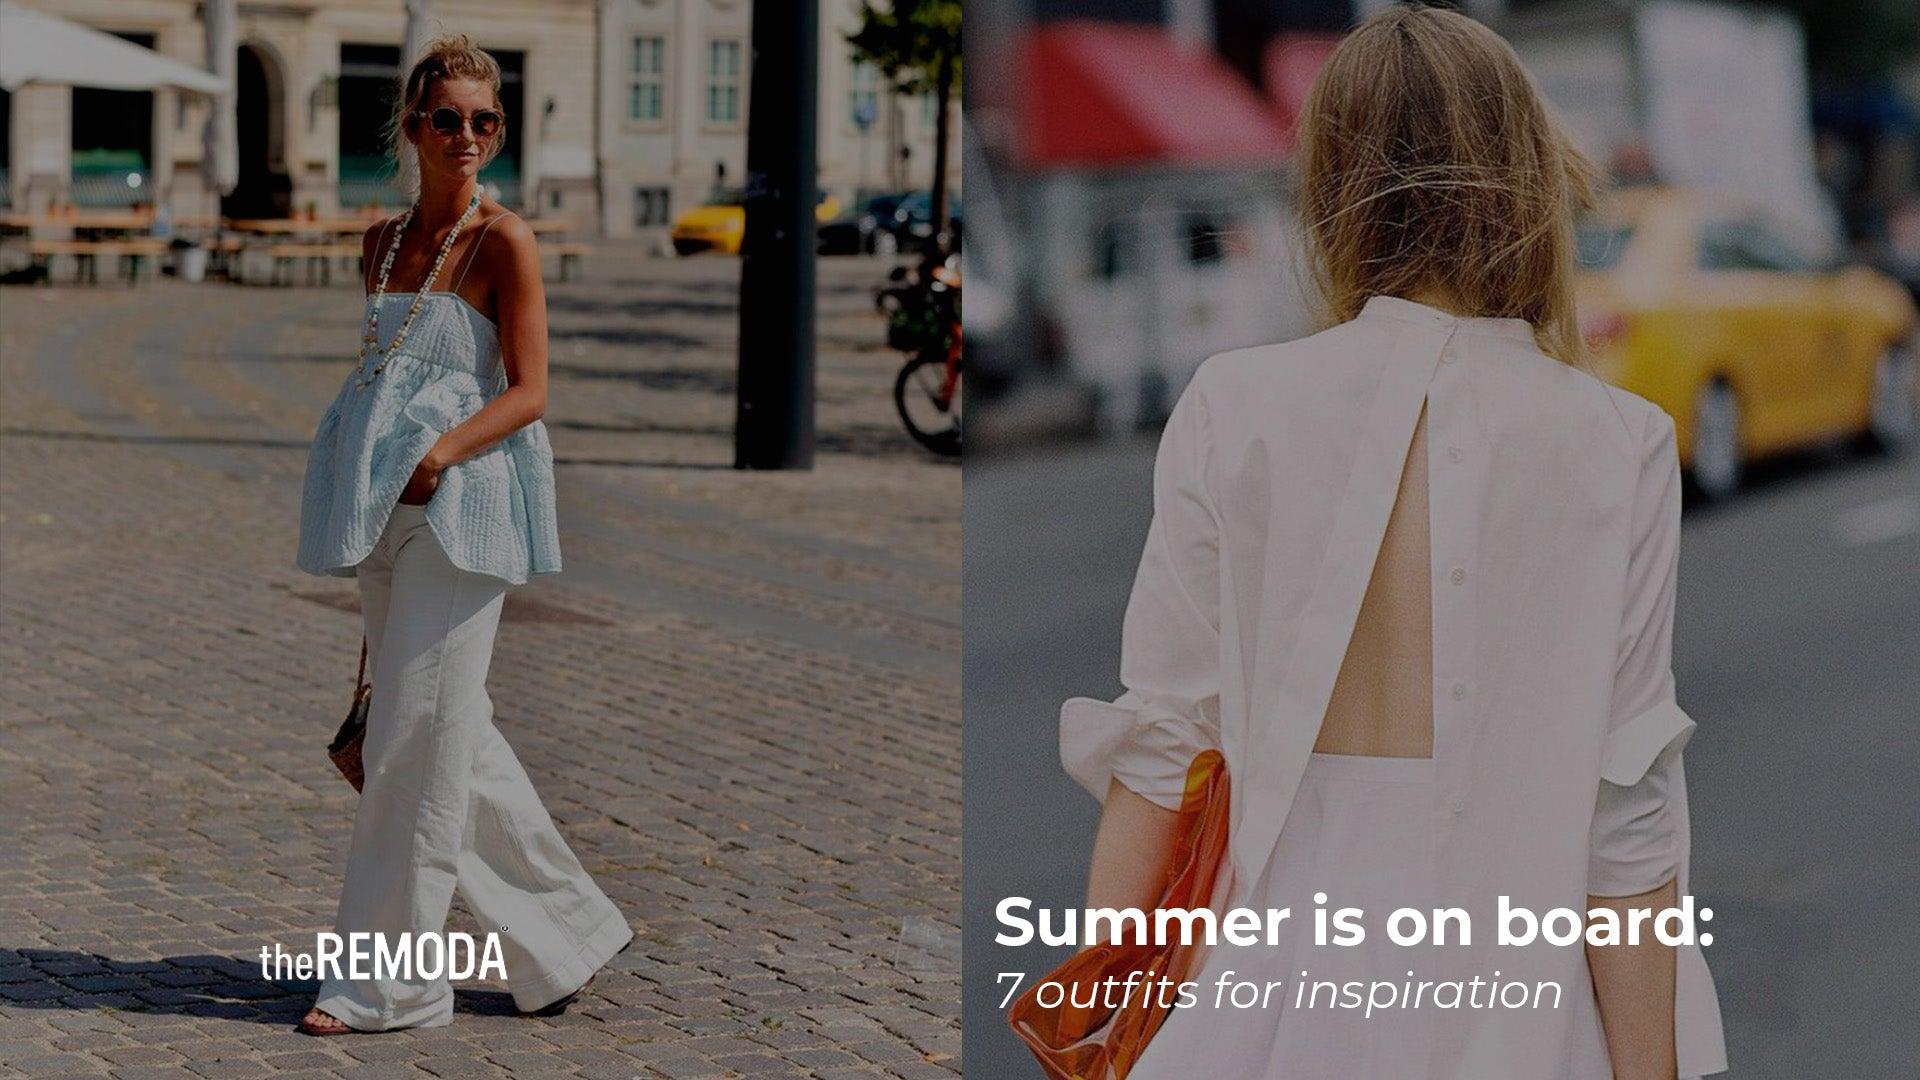 Summer is on board: 7 outfits for inspiration - theREMODA